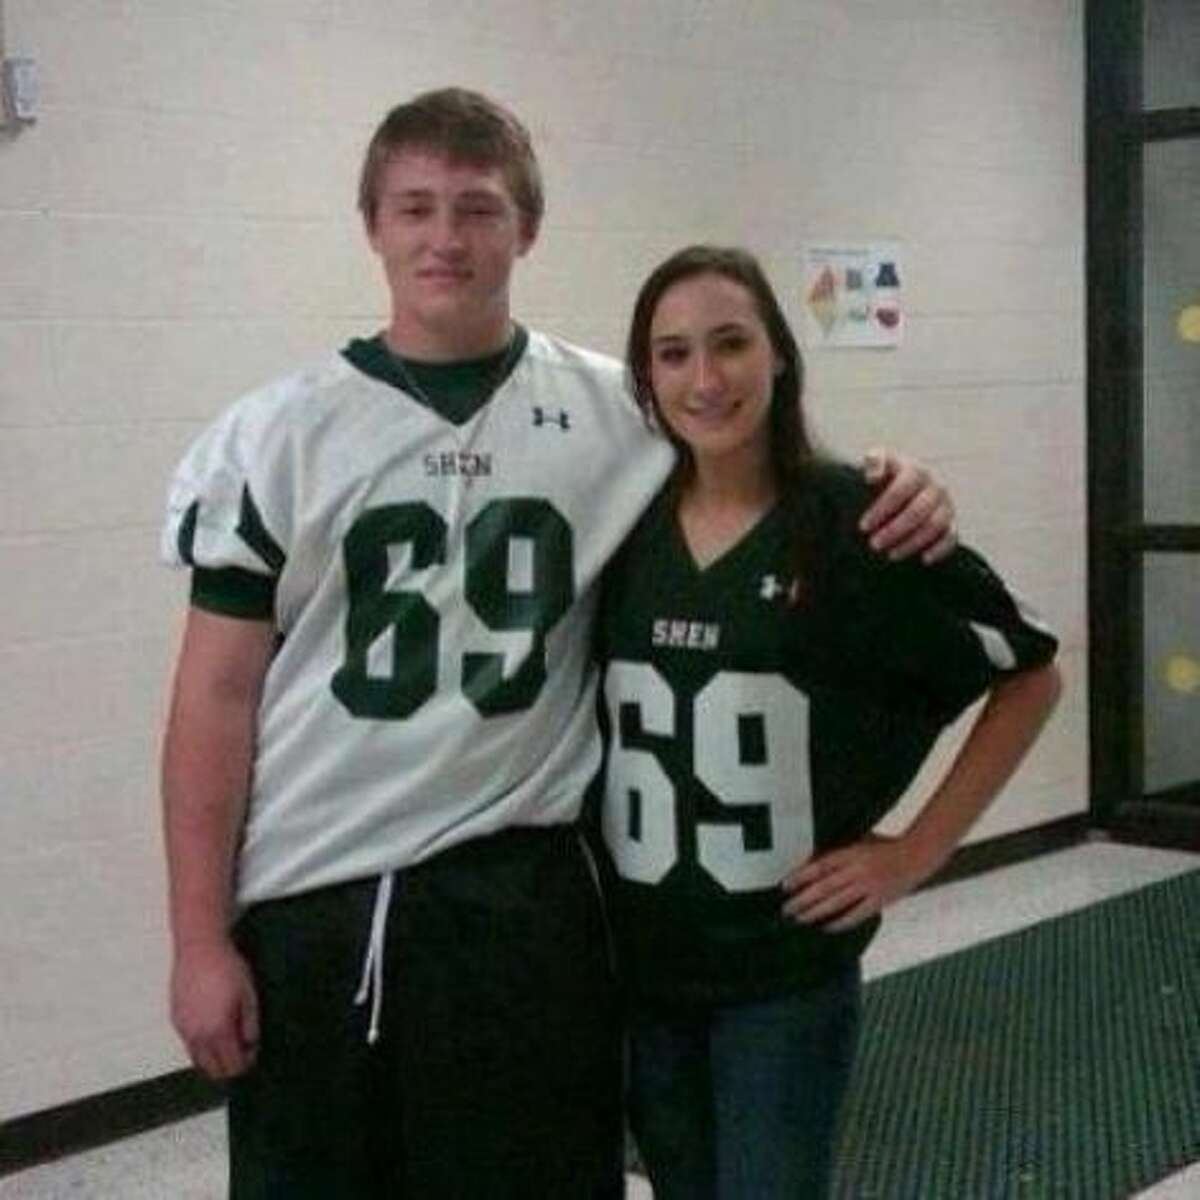 Chris Stewart and Deanna Rivers, seniors at Shenendehowa High School, were killed Saturday, Dec. 1, 2012, in a car crash on the Northway. (Facebook)